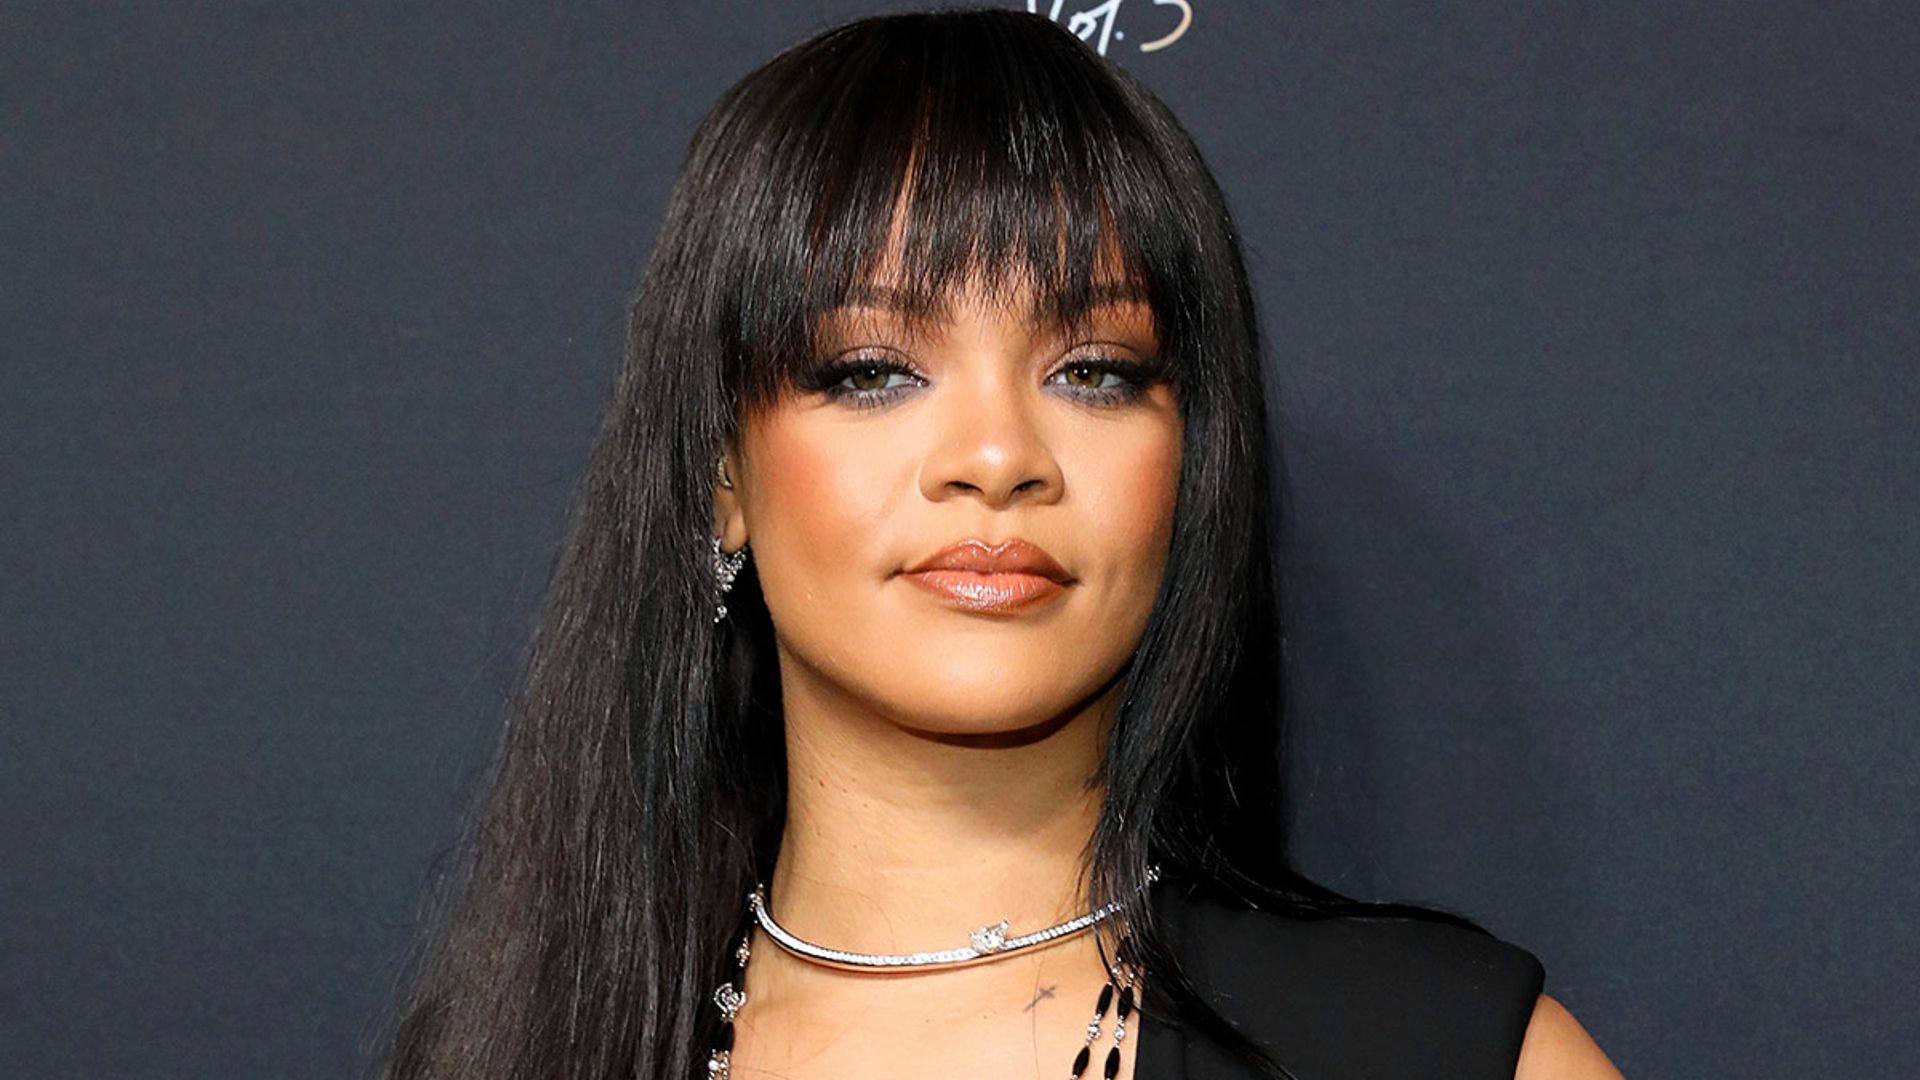 Rihanna skipped Met Gala but steals the show with latest pregnancy look - HELLO!